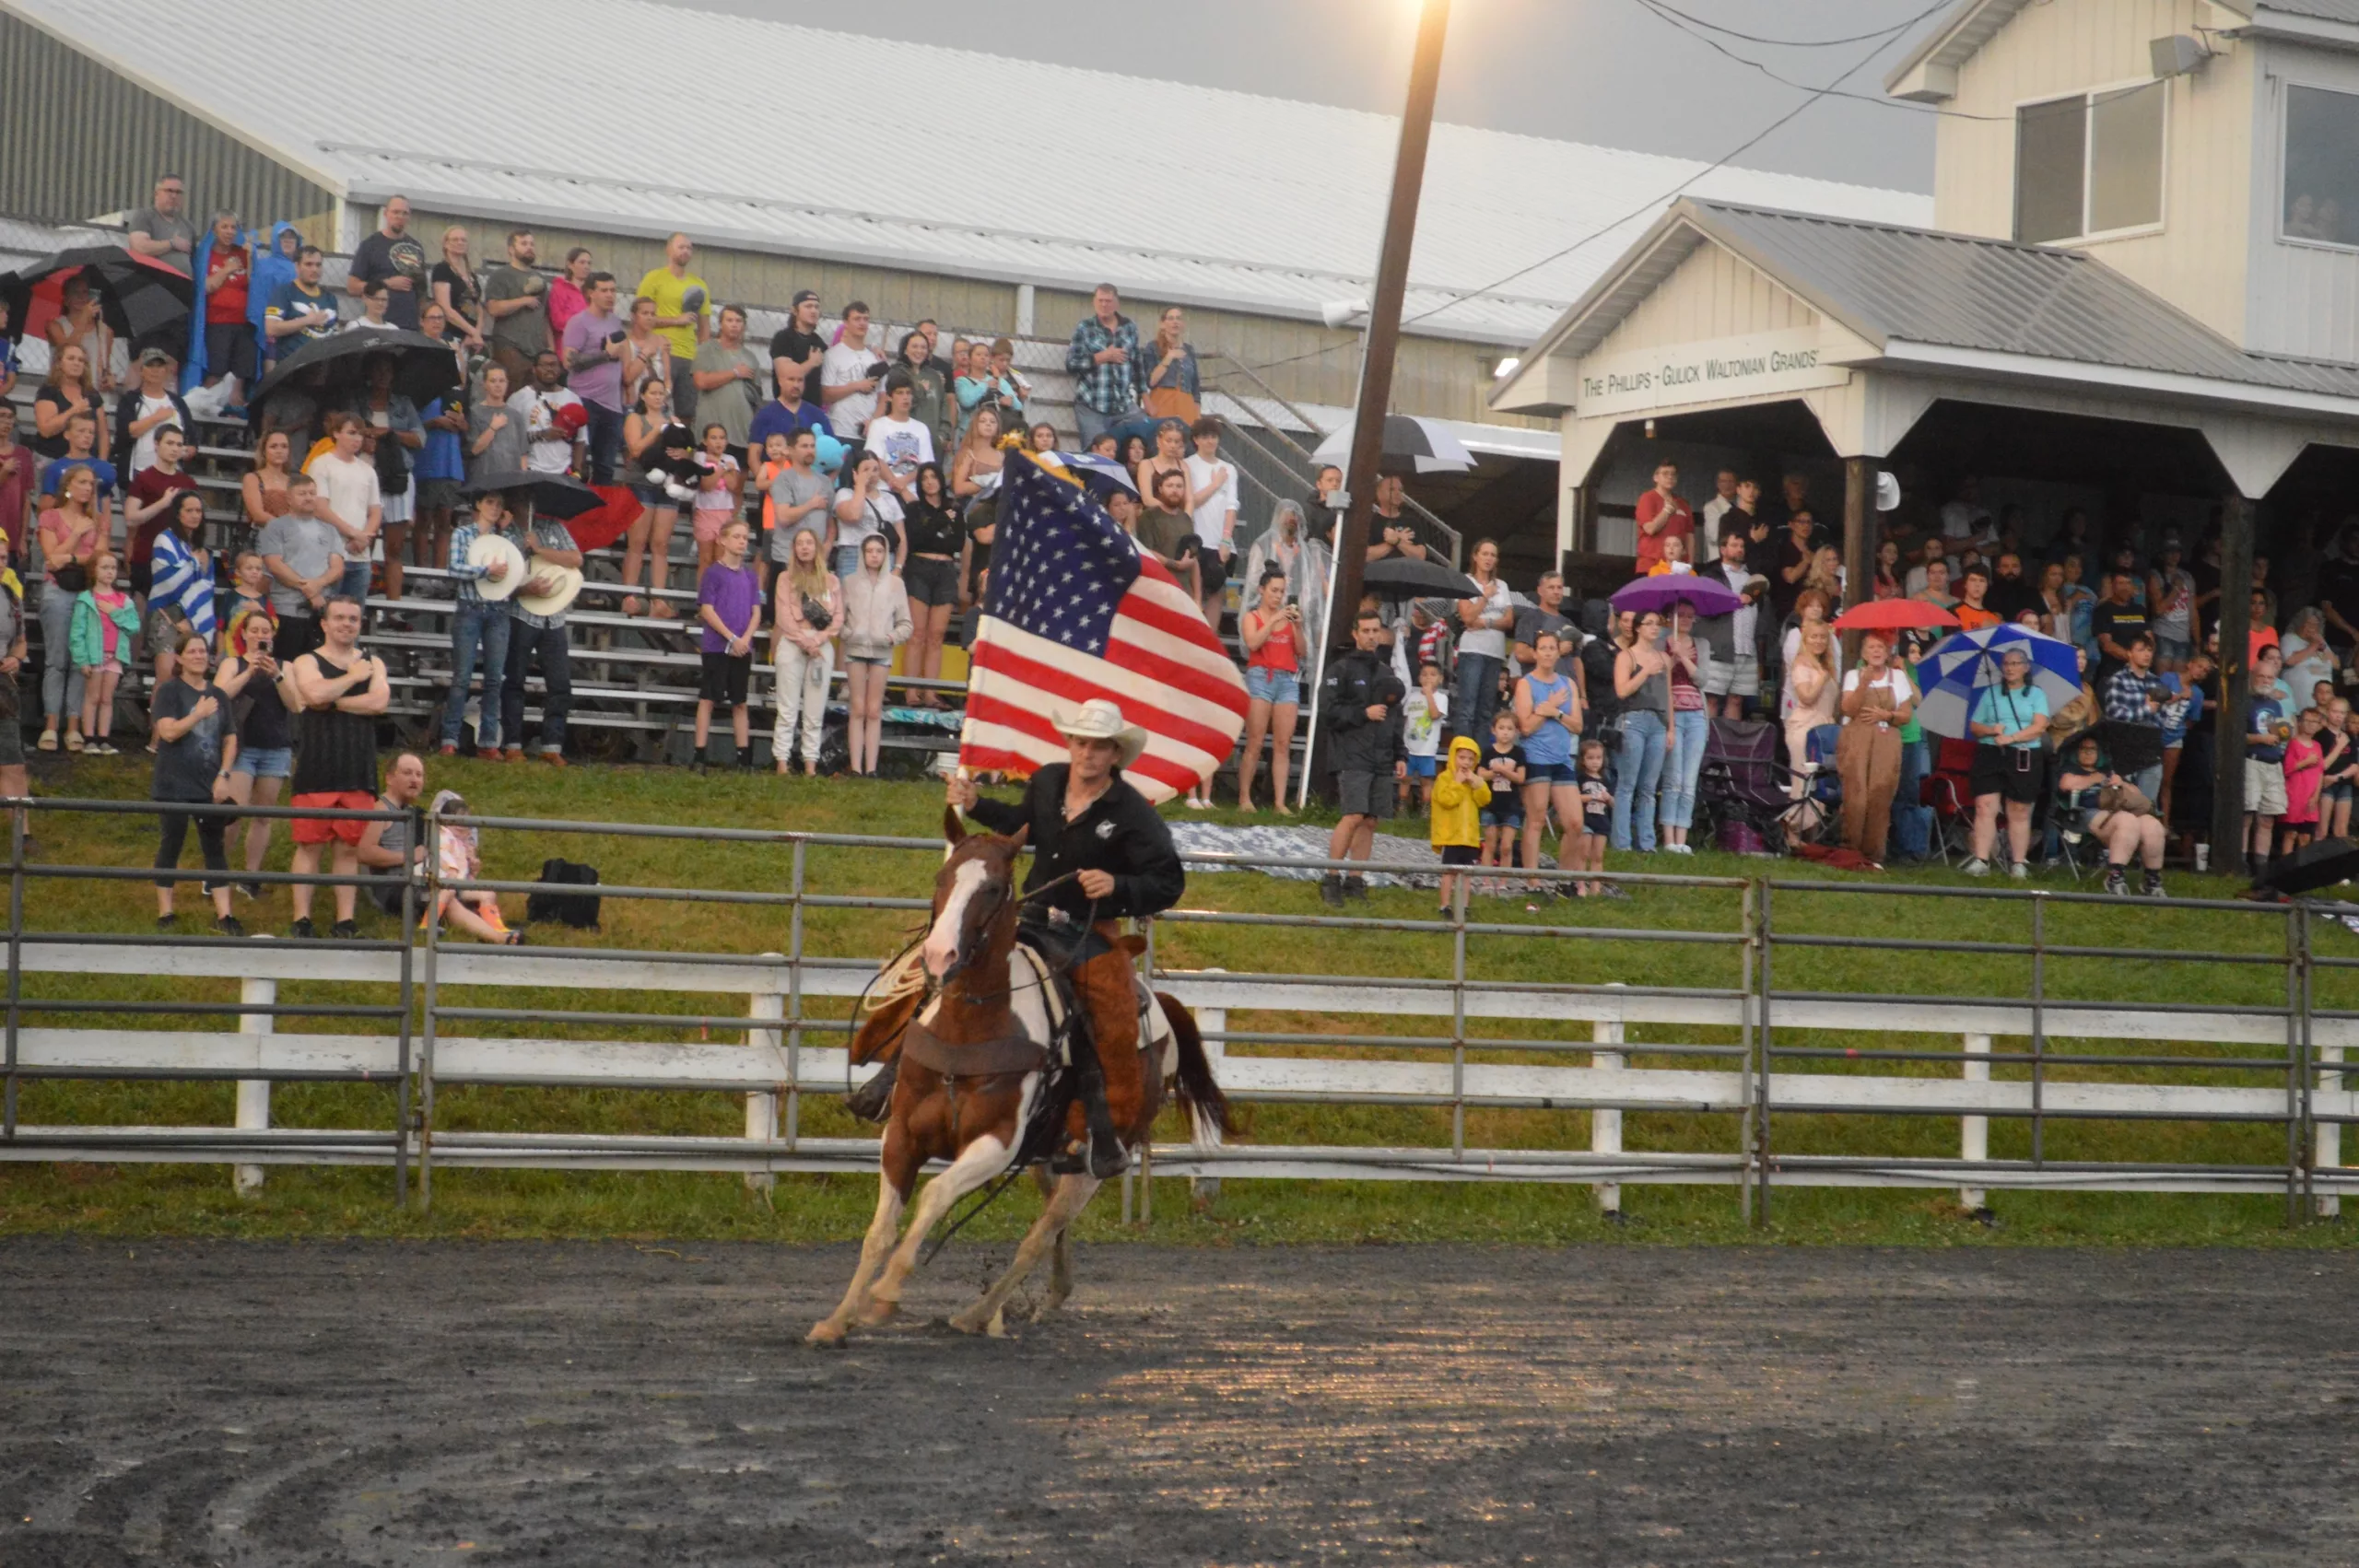 Cowboy riding his horse with the American flag